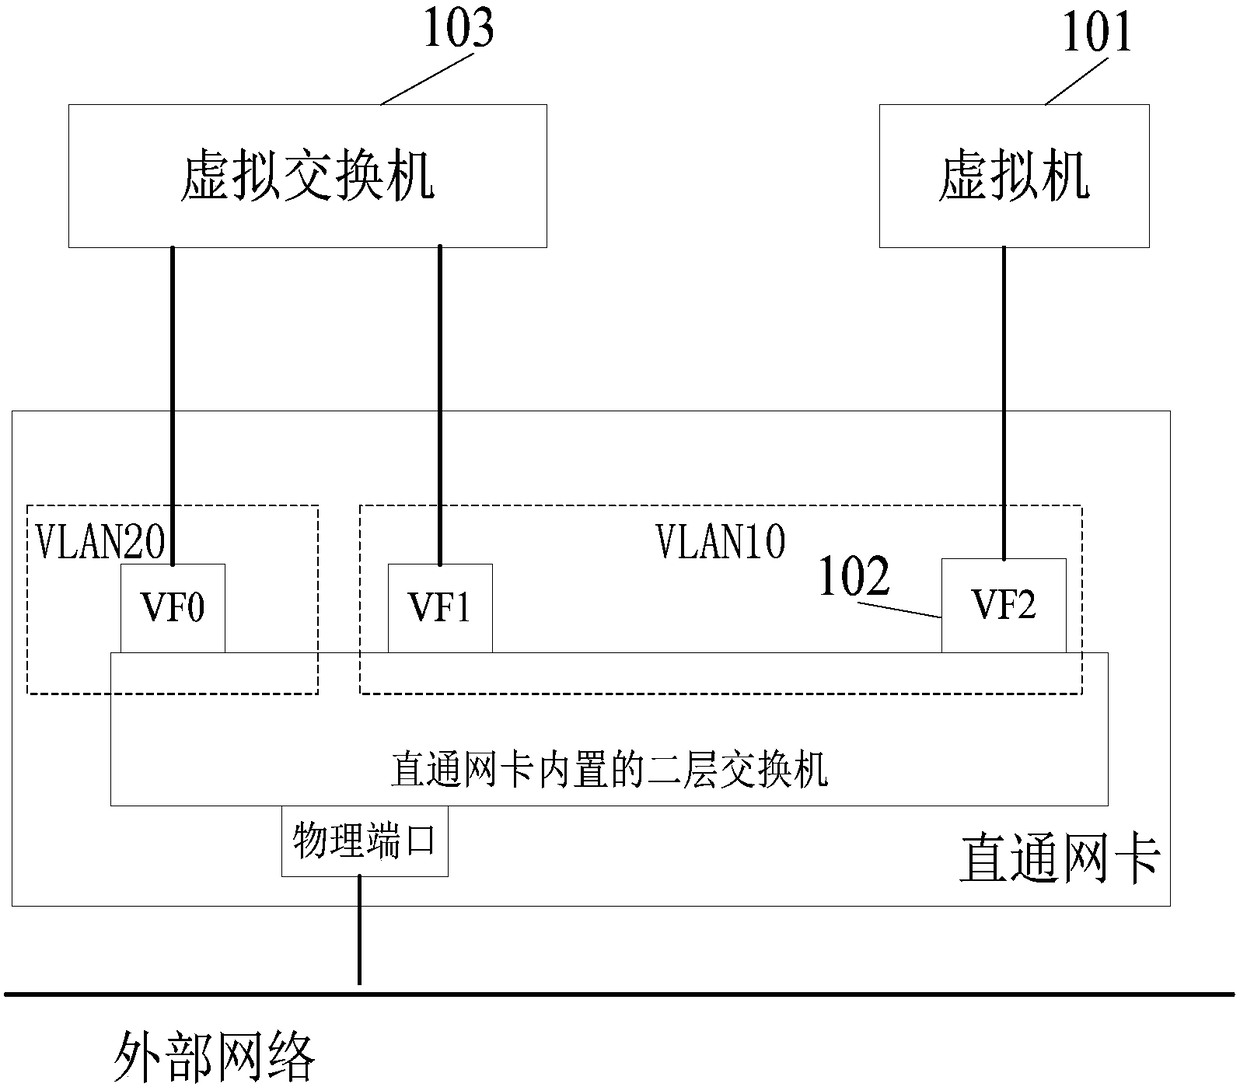 Network card direct connection system and data packet supervision method for virtualization platform